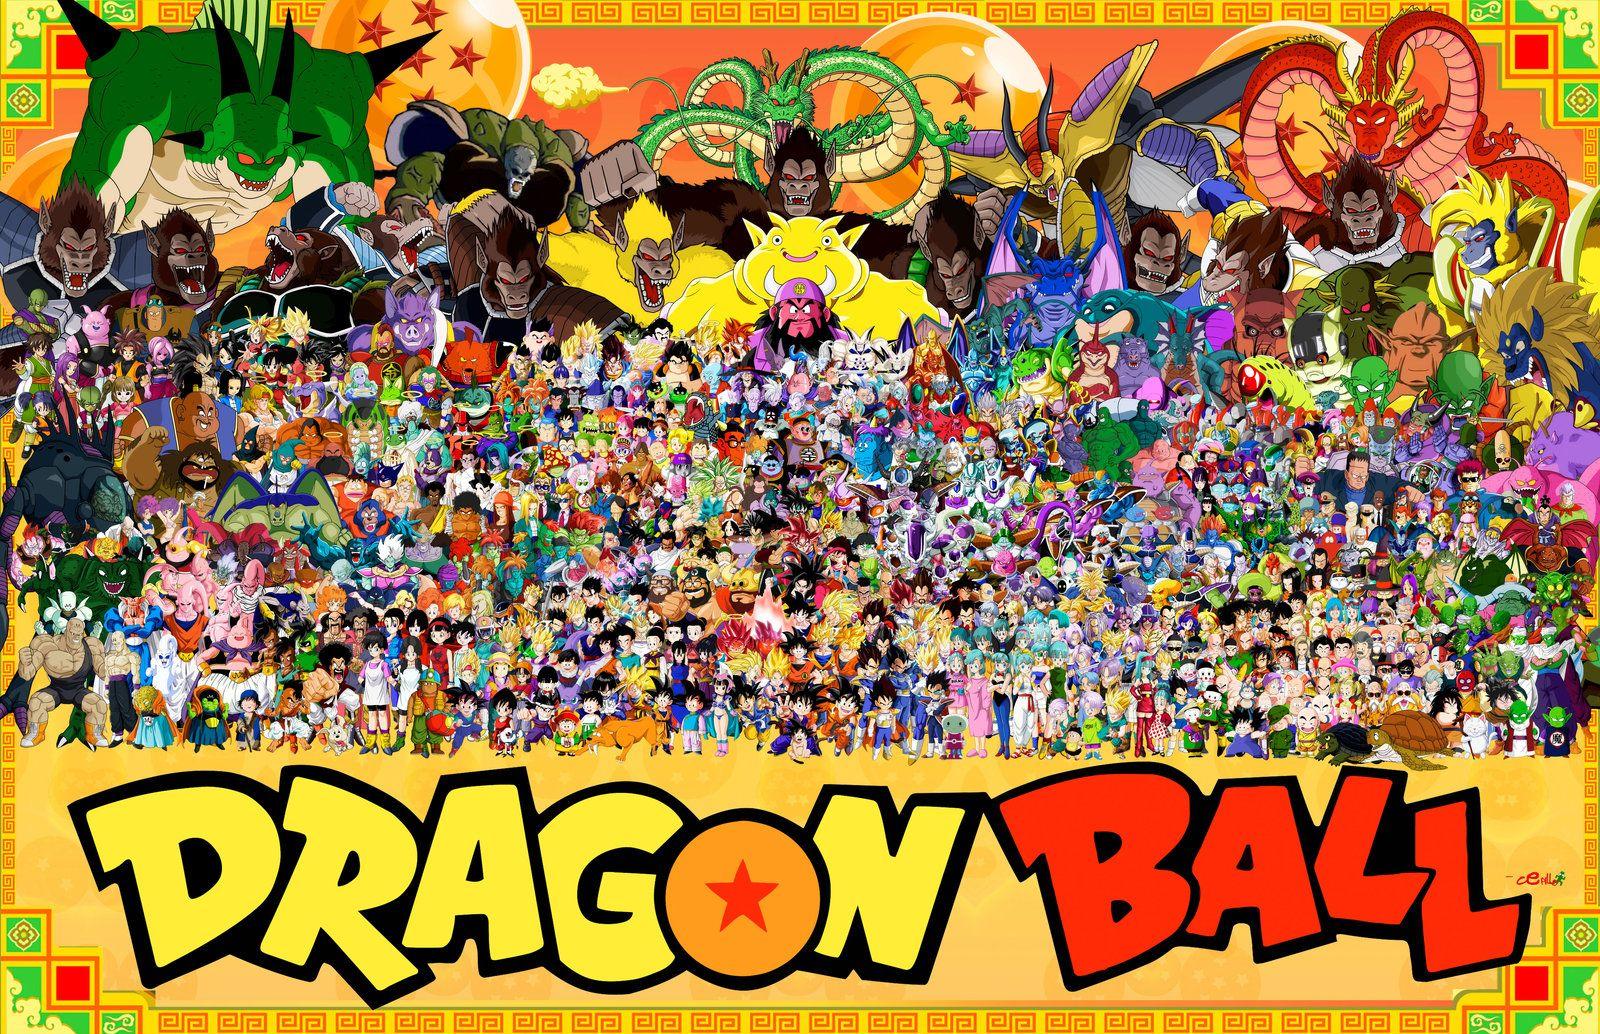 Dbz All Characters Wallpaper Portugal Save Piv Phuket